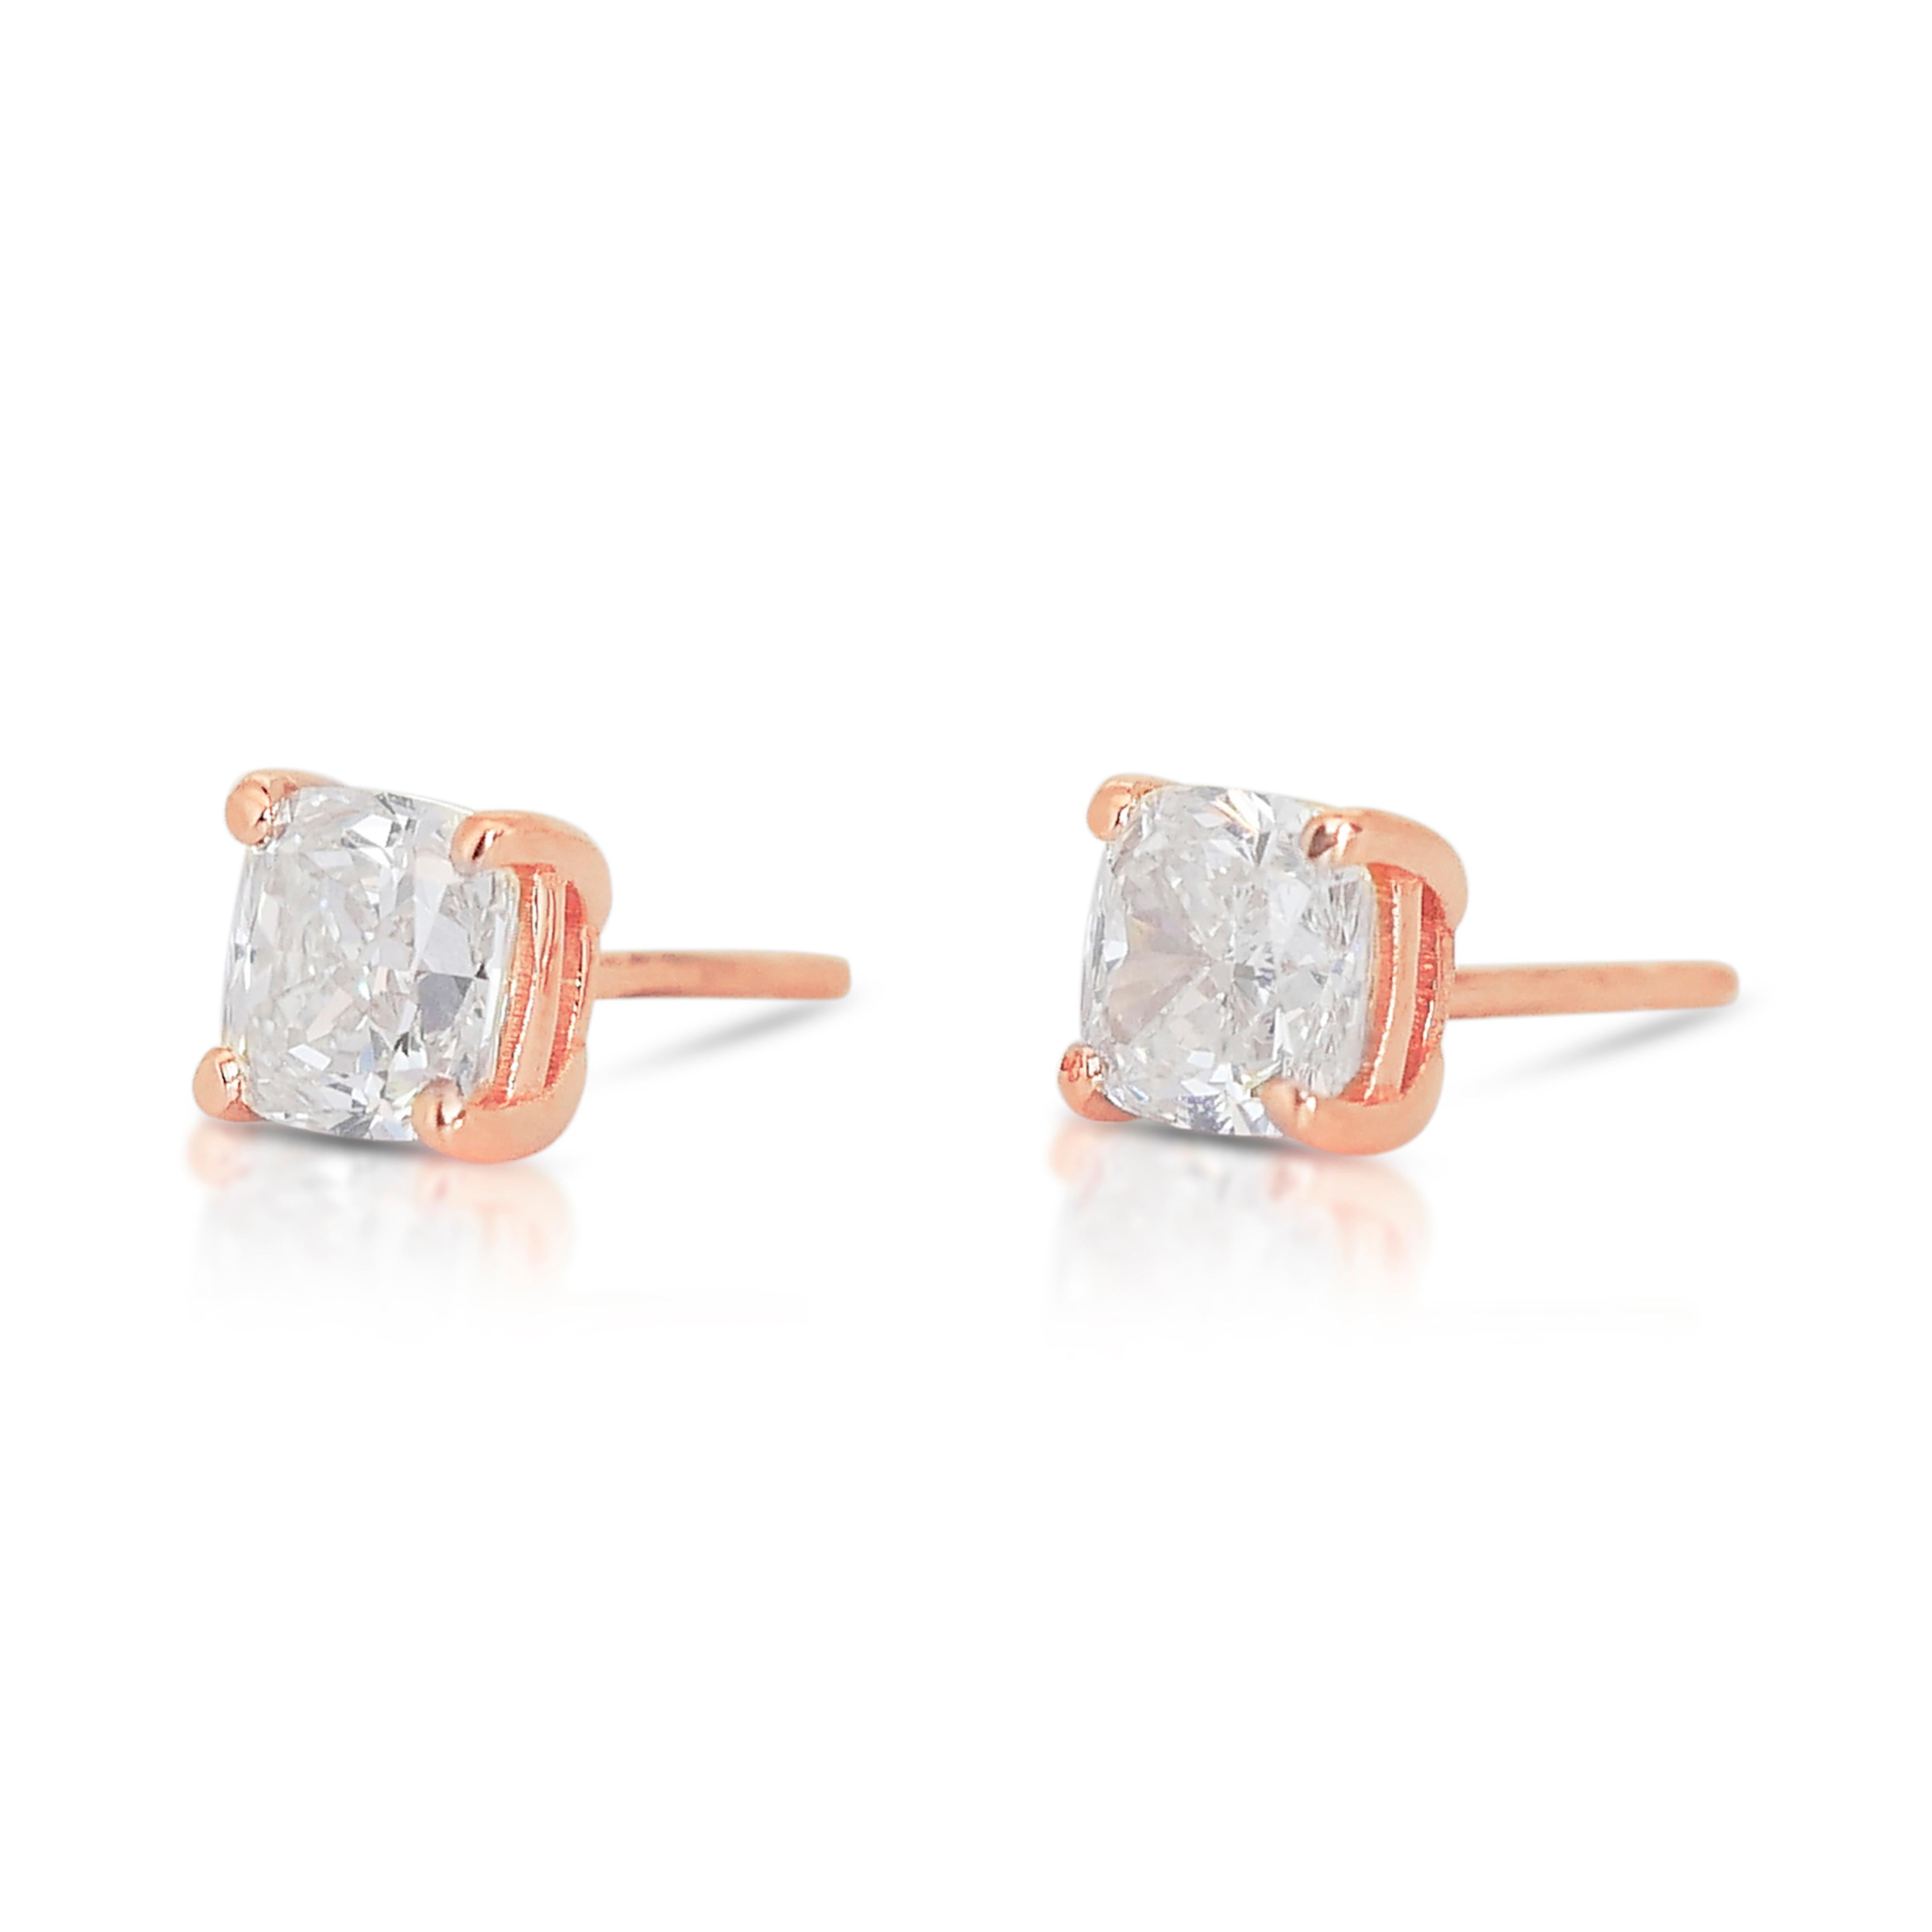 Luxurious 1.68ct Diamond Stud Earrings in 14k Rose Gold - IGI Certified

Discover the allure of these 14k rose gold stud earrings, featuring 2 exquisite square cushion-cut diamonds with a combined weight of 1.68-carat. Certified by IGI, these stud